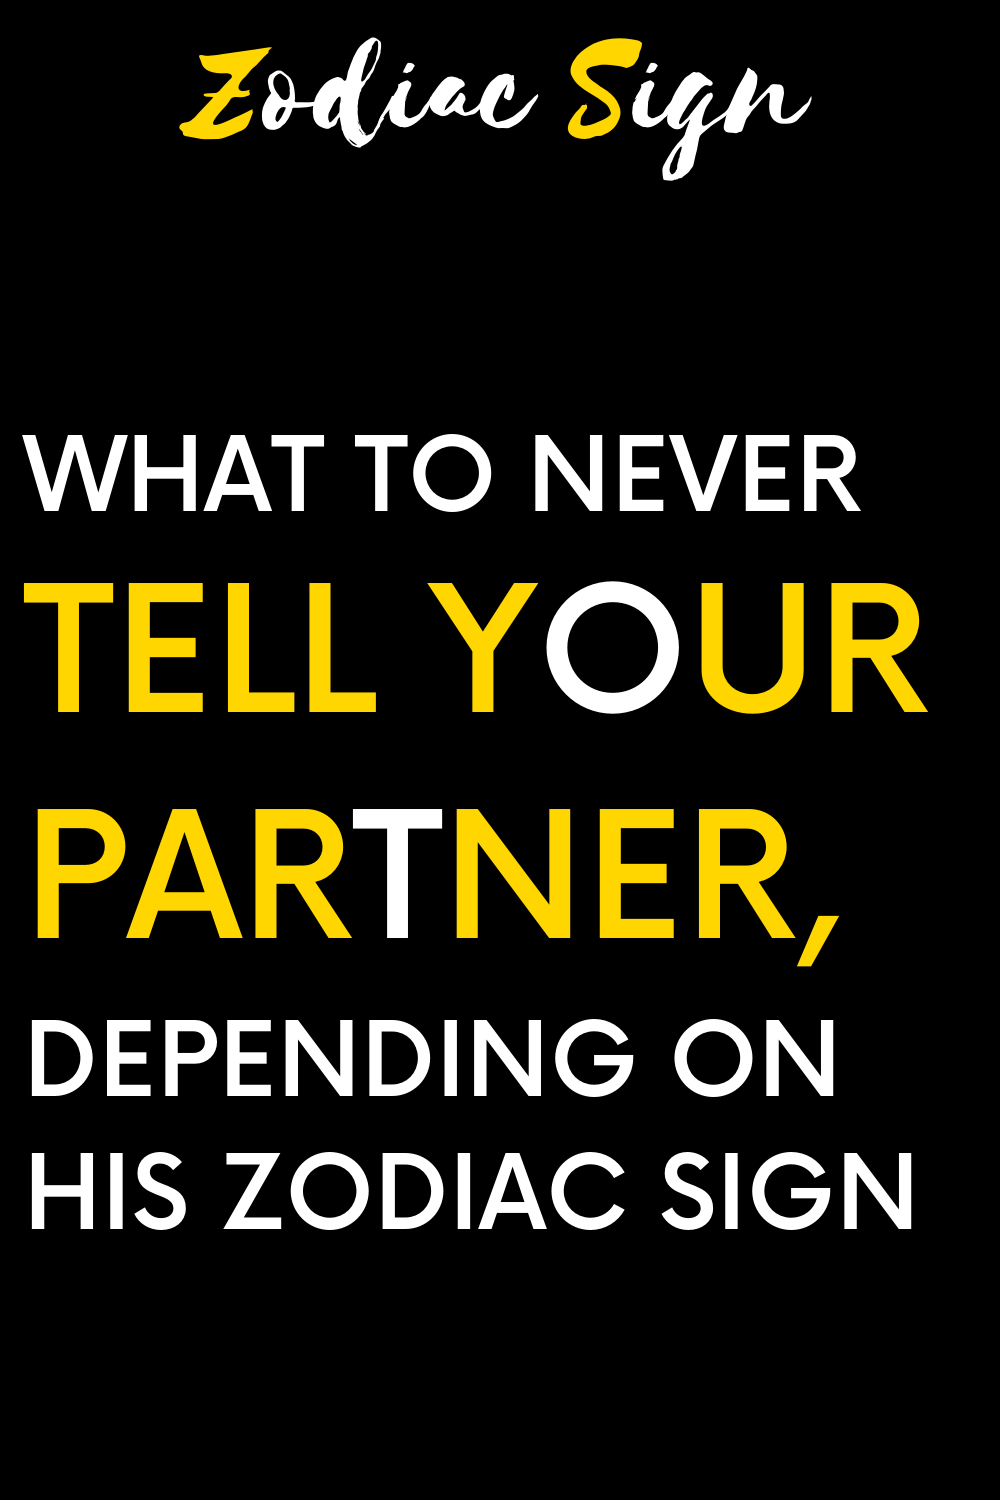 What to never tell your partner, depending on his zodiac sign